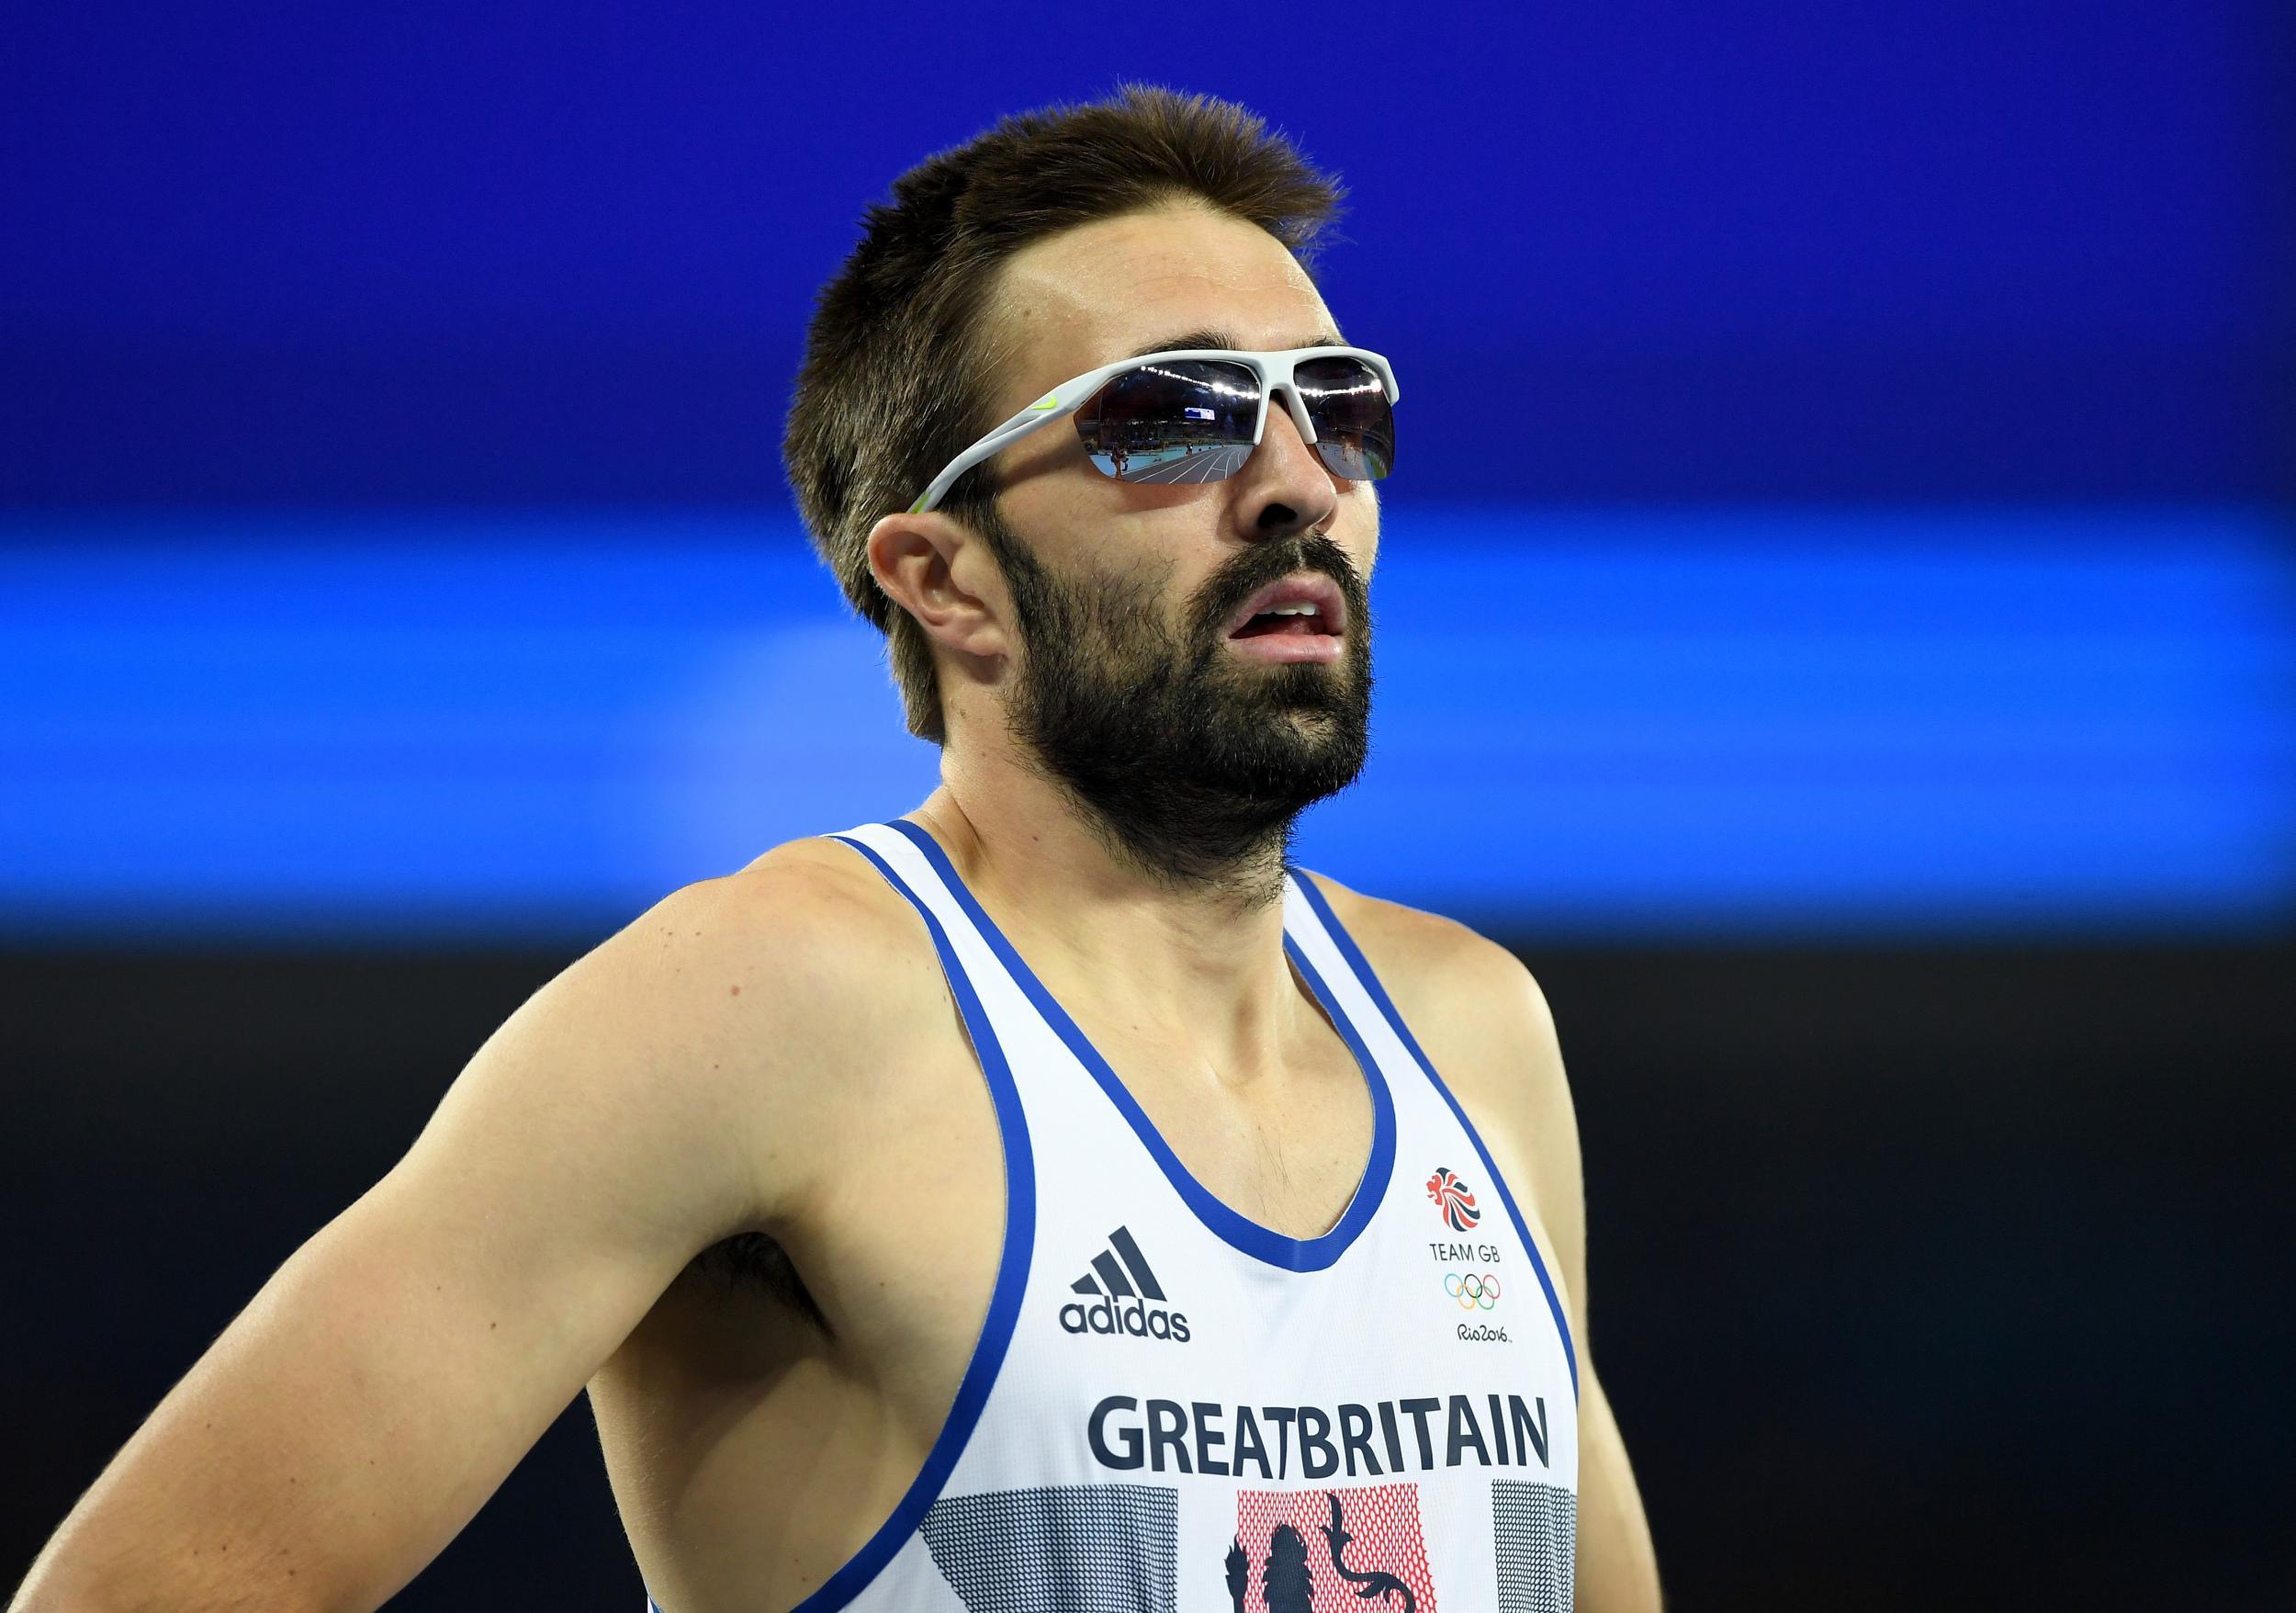 Martyn Rooney fails to qualify for the finals